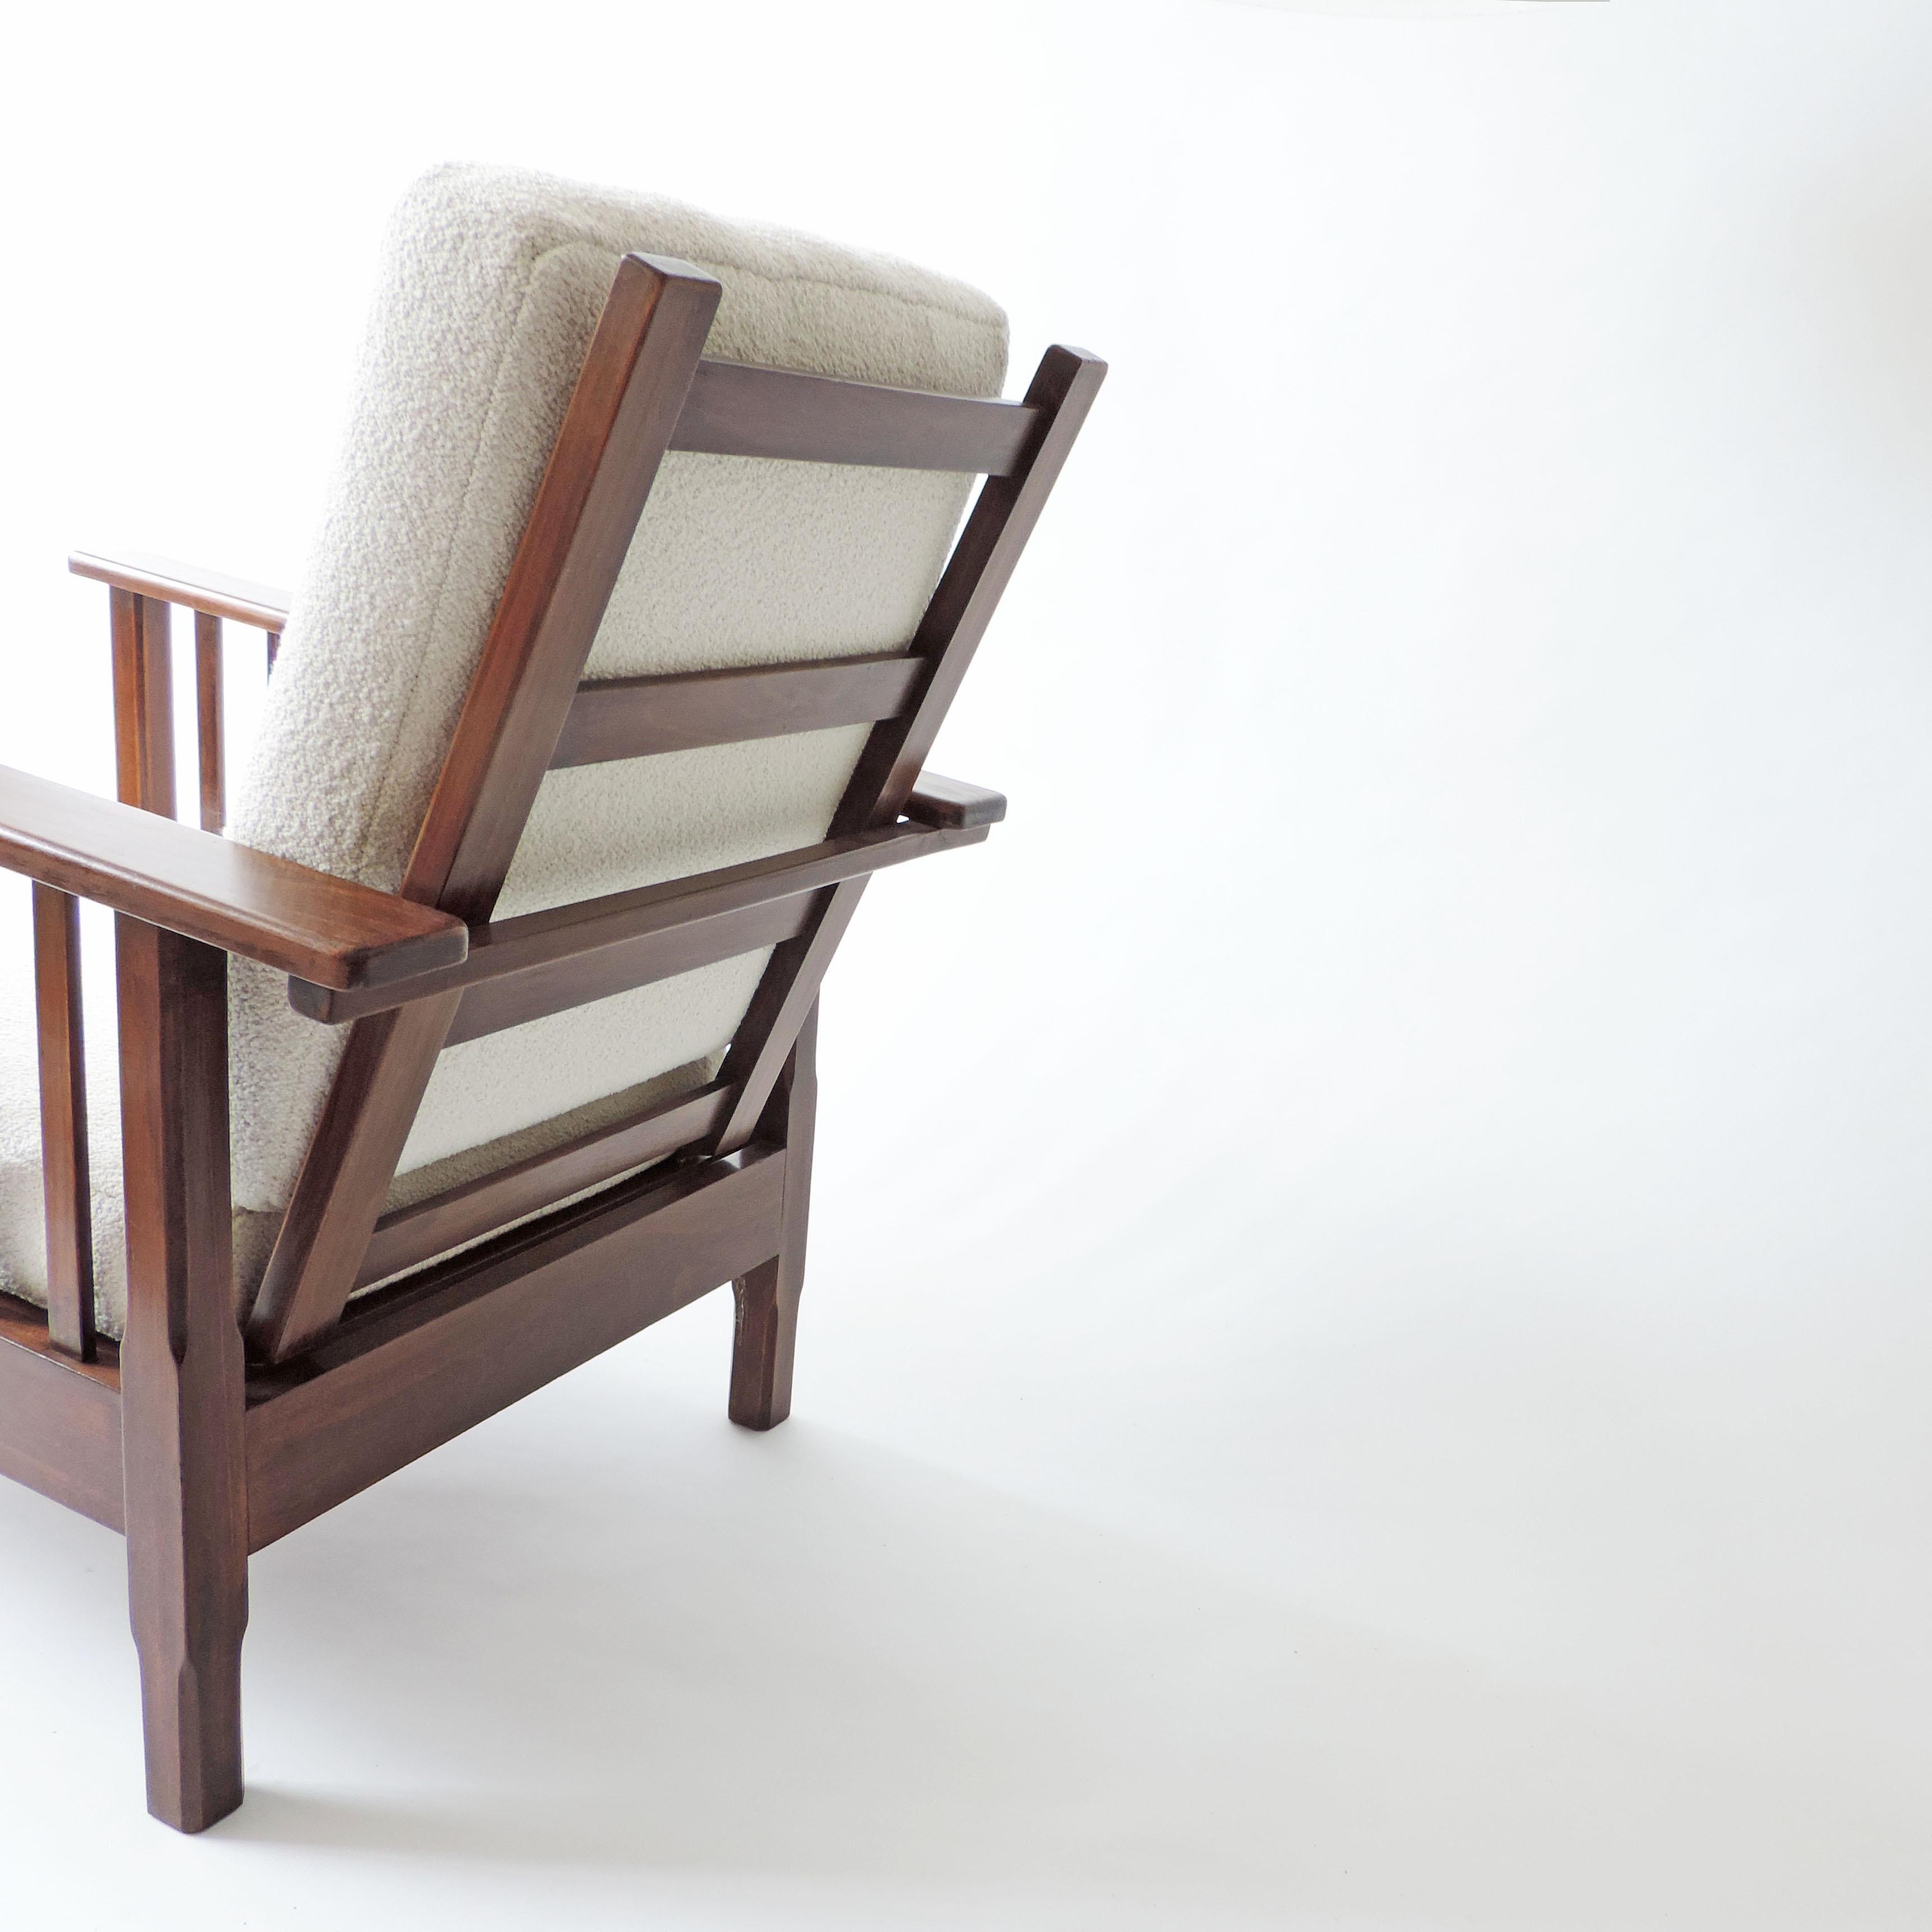 Italian Rationalist Adjustable Wooden Lounge Chair, Italy 1940s For Sale 6